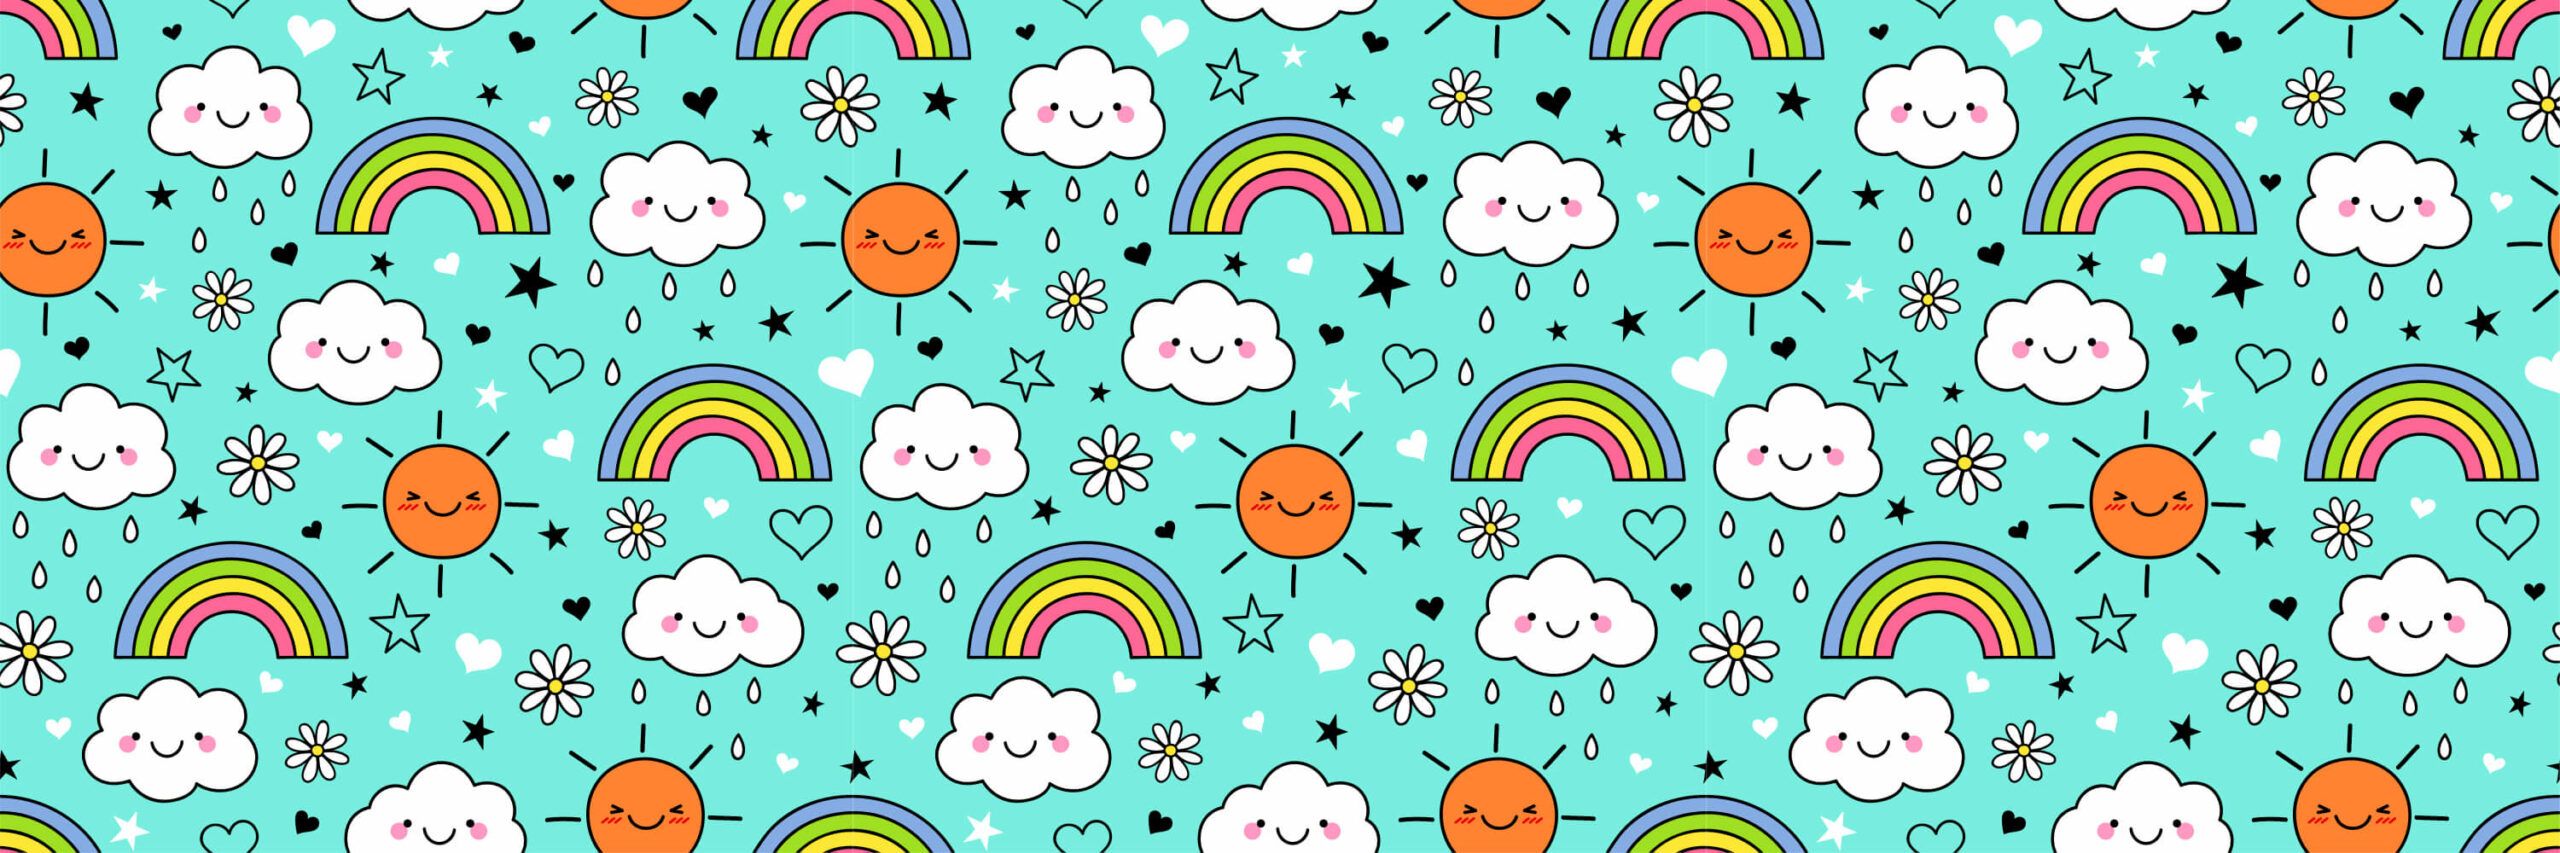 A pattern with clouds, rainbows and hearts on it - Kidcore